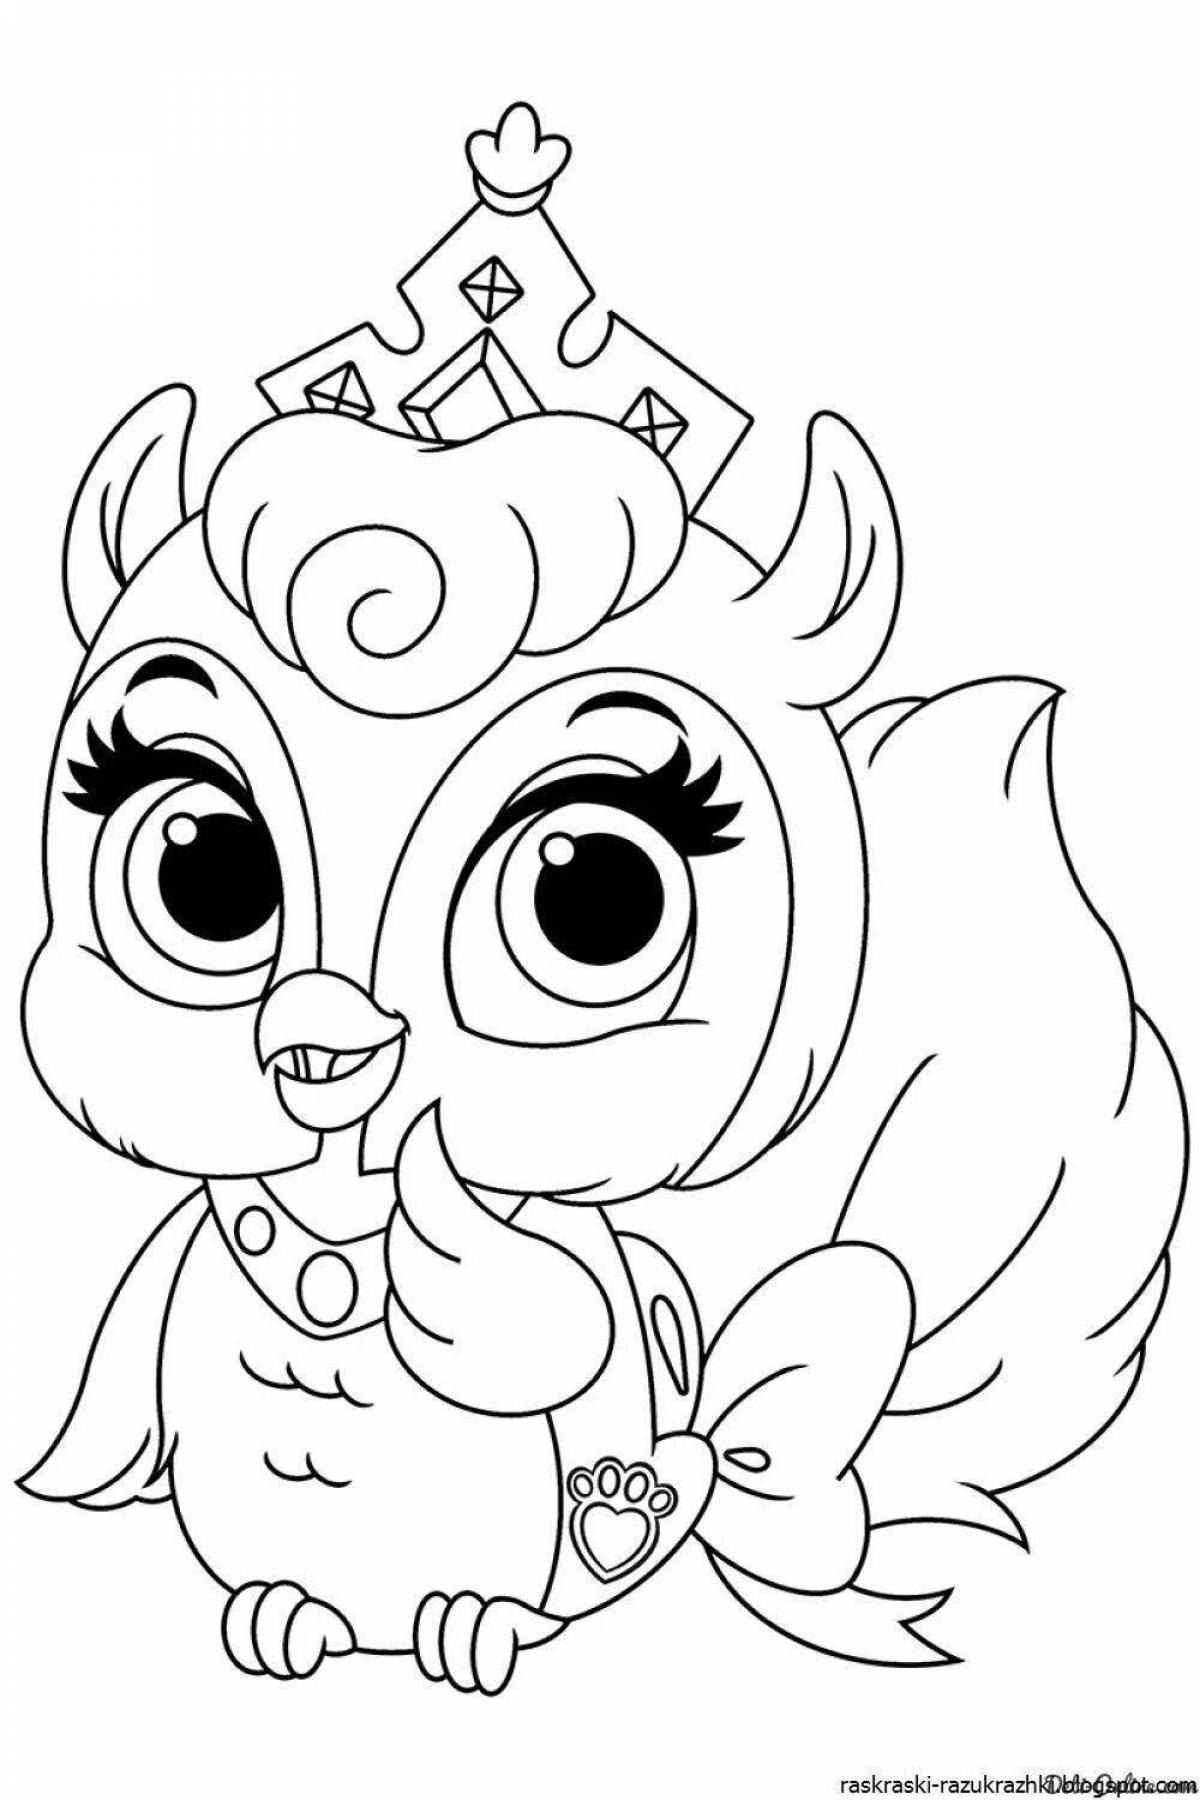 Beautiful coloring book for girls with animal princesses